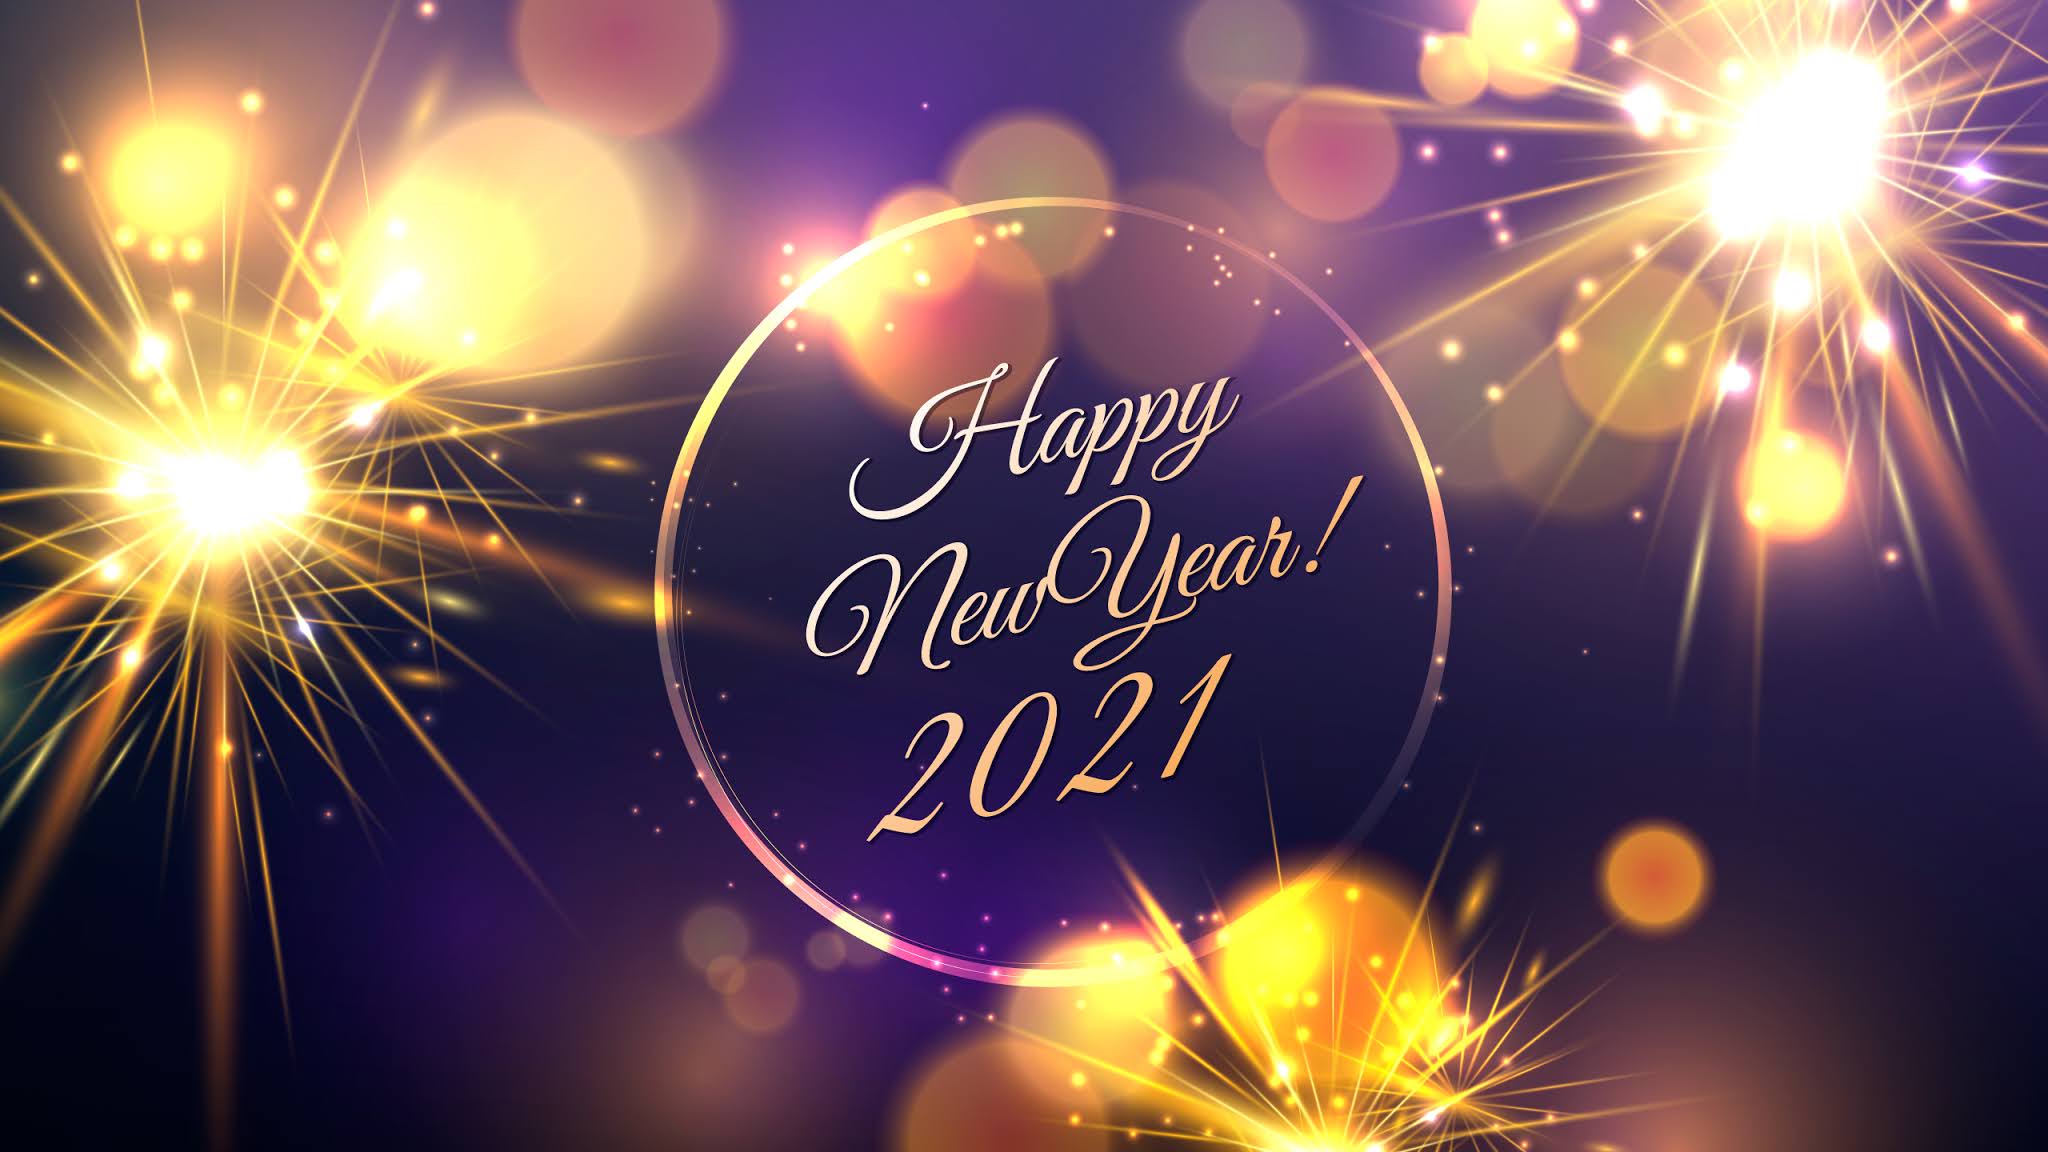 Happy New Year 2021 Fireworks Background Download Wallpapers Srcwap